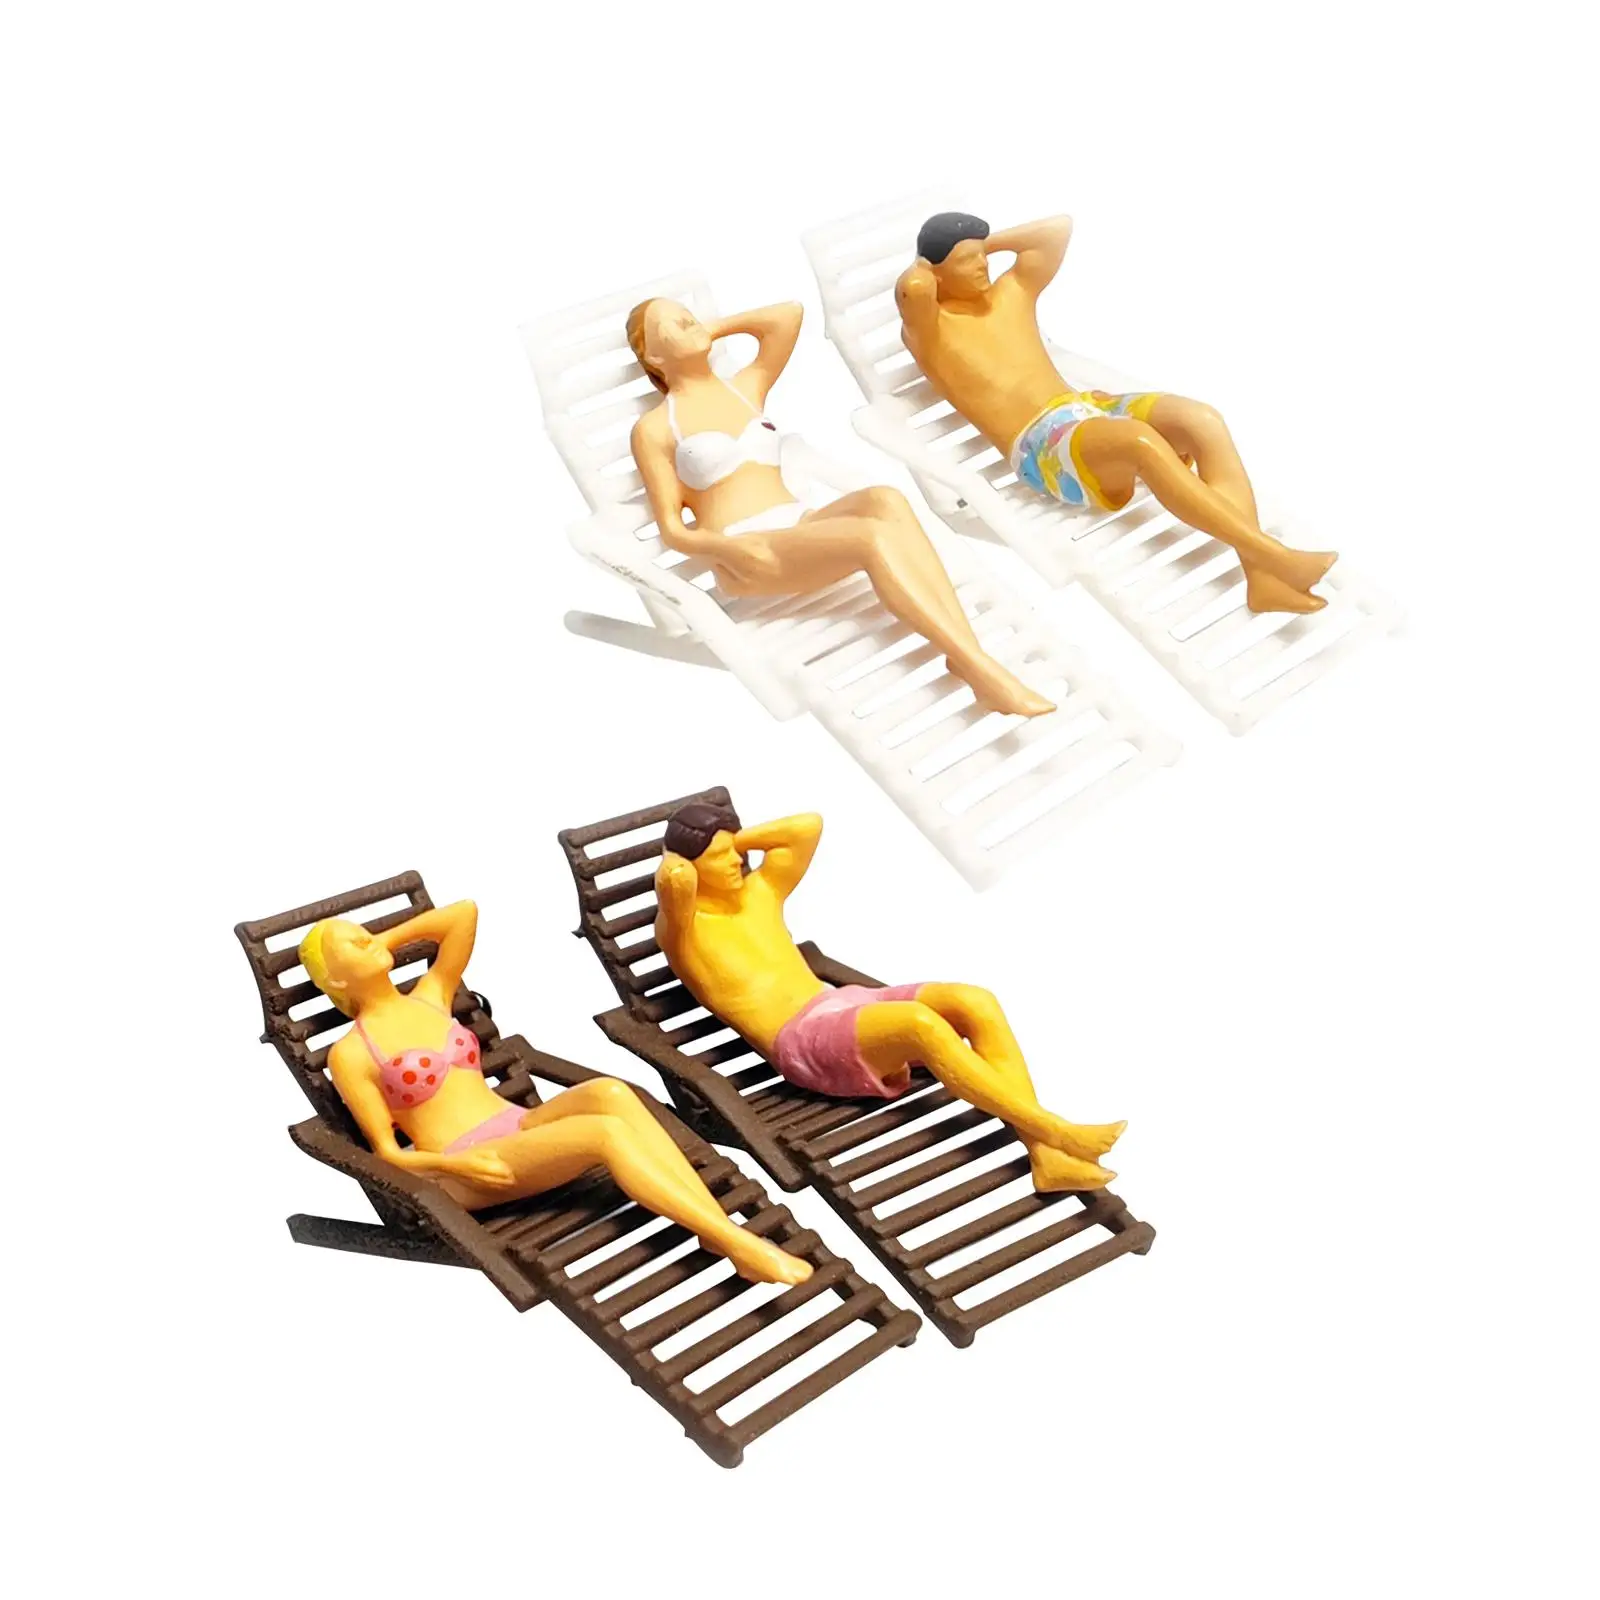 Resin 1/64 Scale People Figures Set Deck Chair Model Ornament Mini People Model for Sand Table Diorama Dollhouse Layout Decor